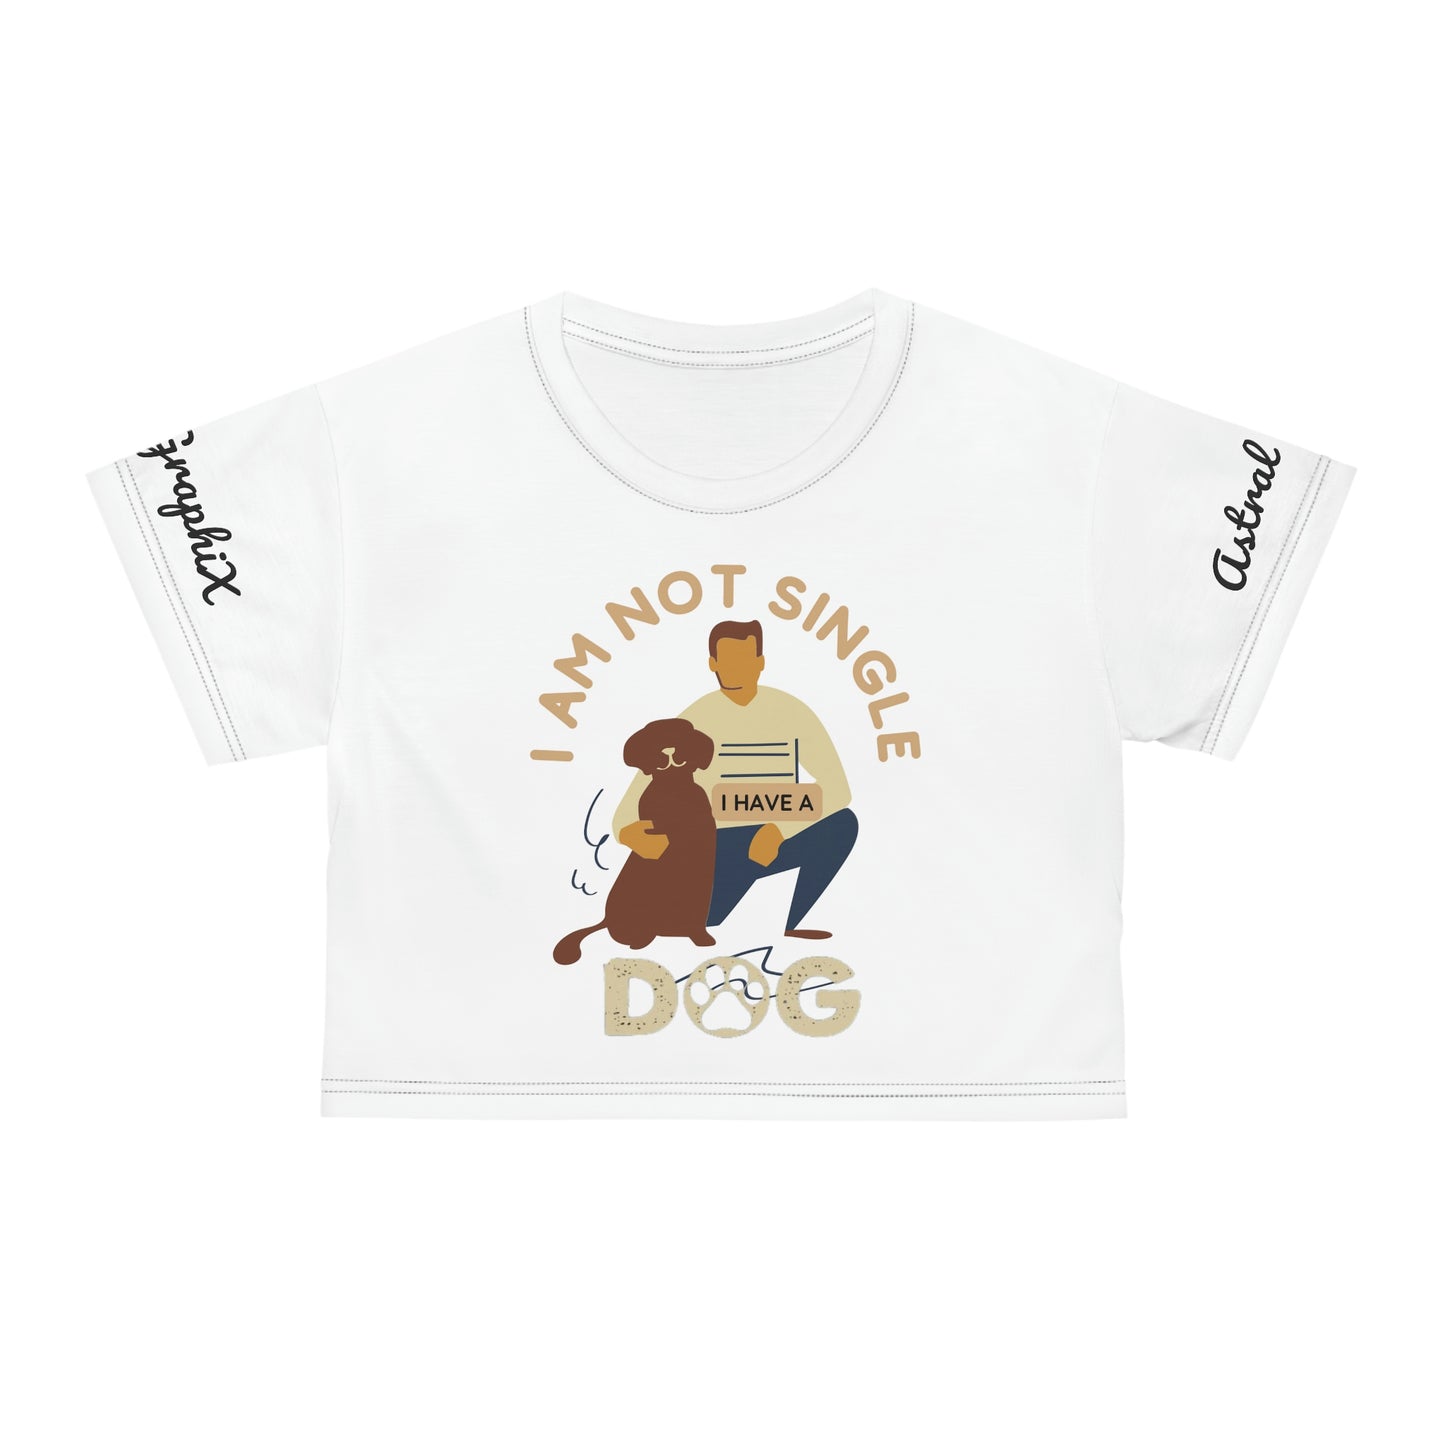 Word Art Collection - AOP Crop Tee - Not Single|Have Dog in White